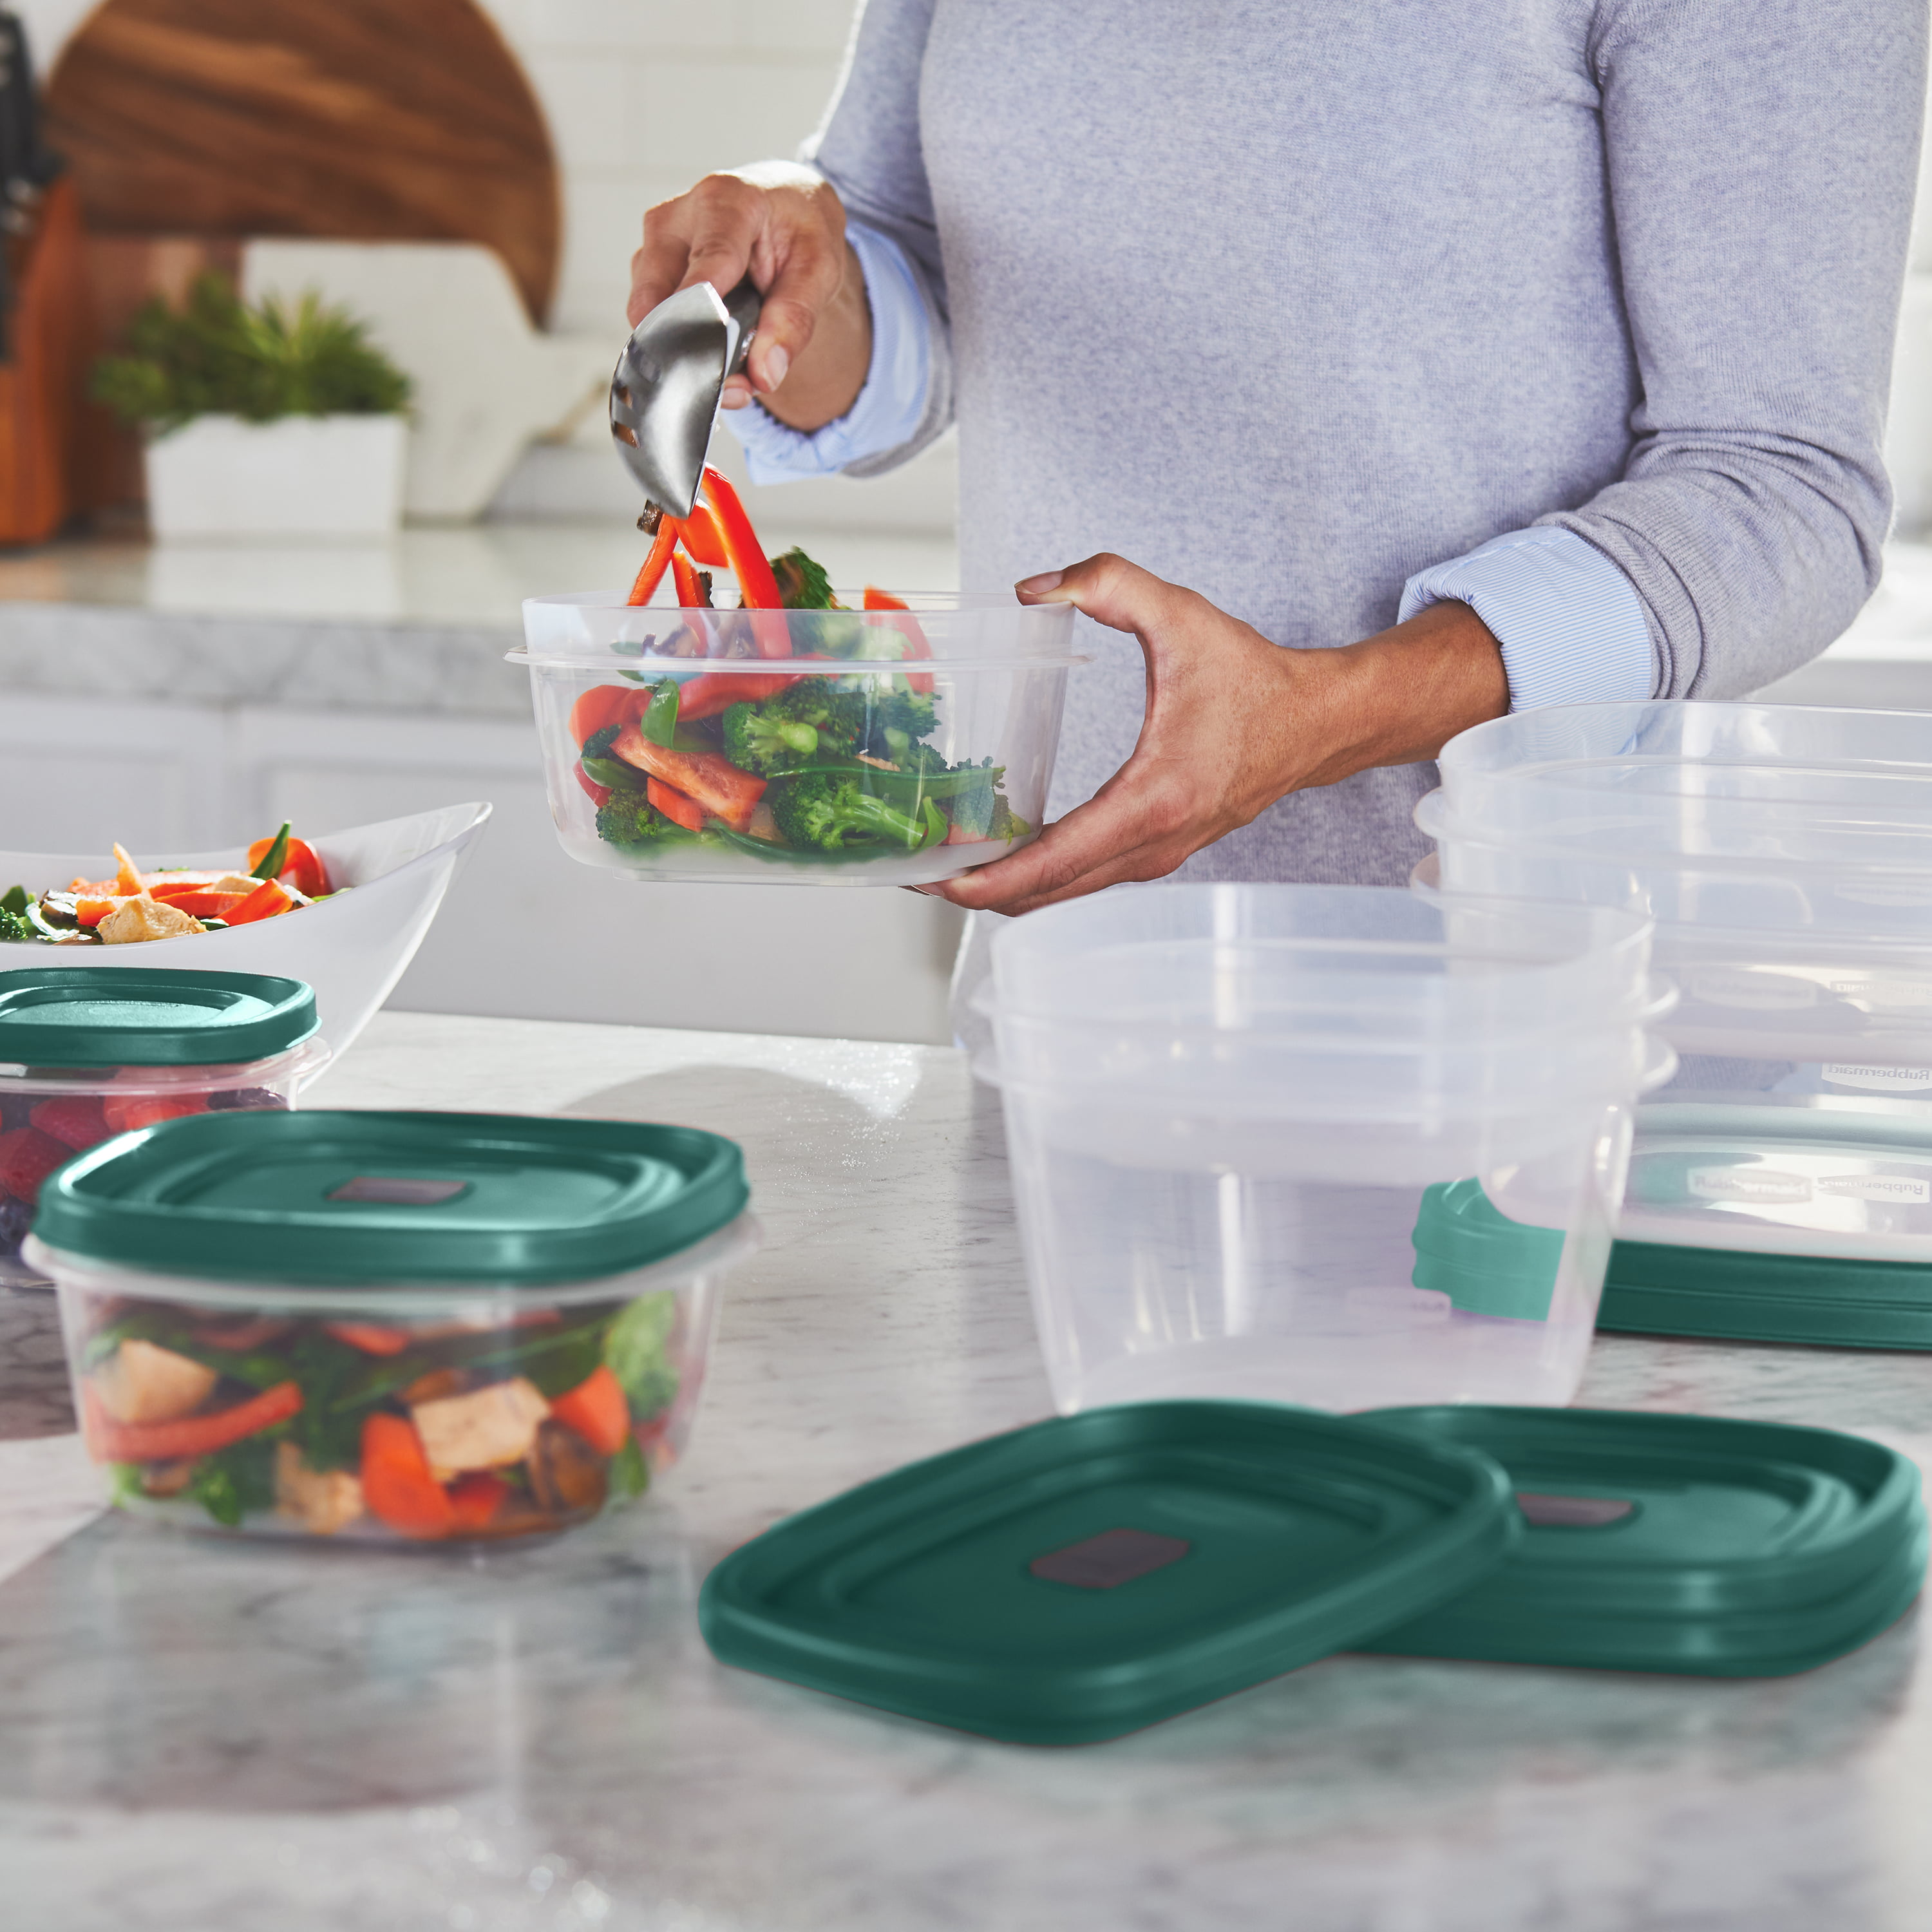 HOT* Rubbermaid Easy Find Vented Lids Food Storage Containers, 38-Piece Set  only $9!